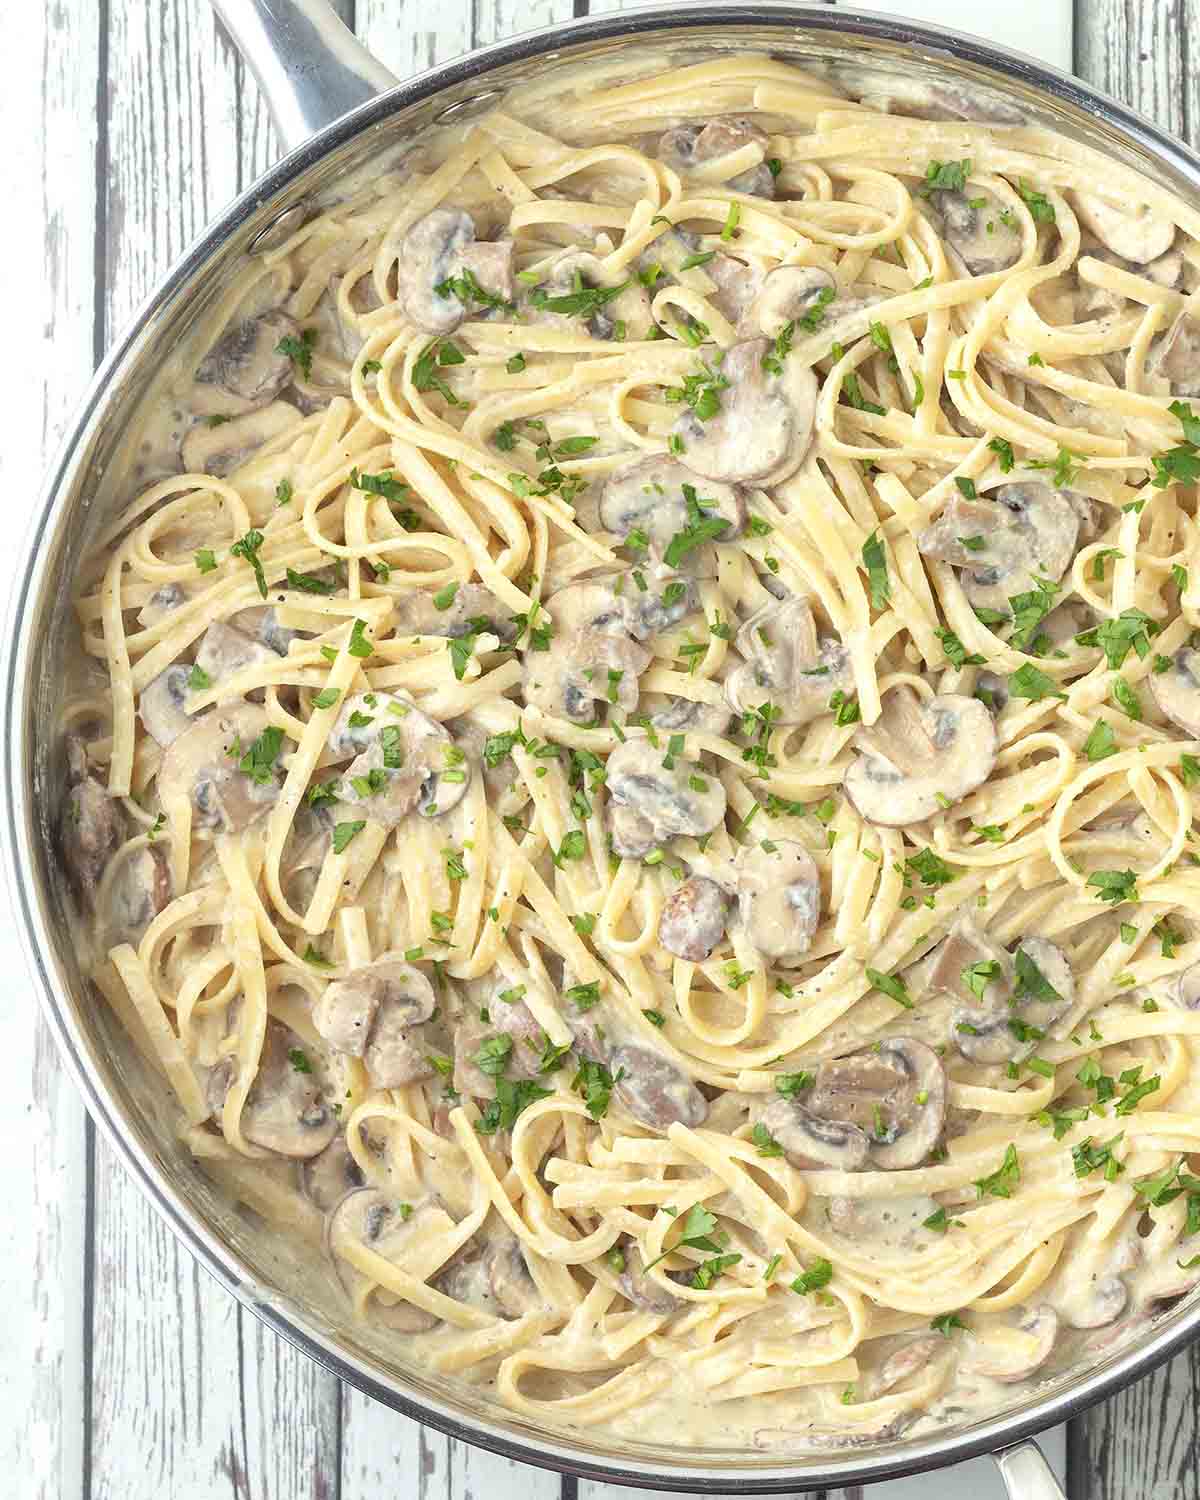 A large stainless-steel pan of freshly made vegan mushroom pasta, the pasta is garnished with fresh parsley.